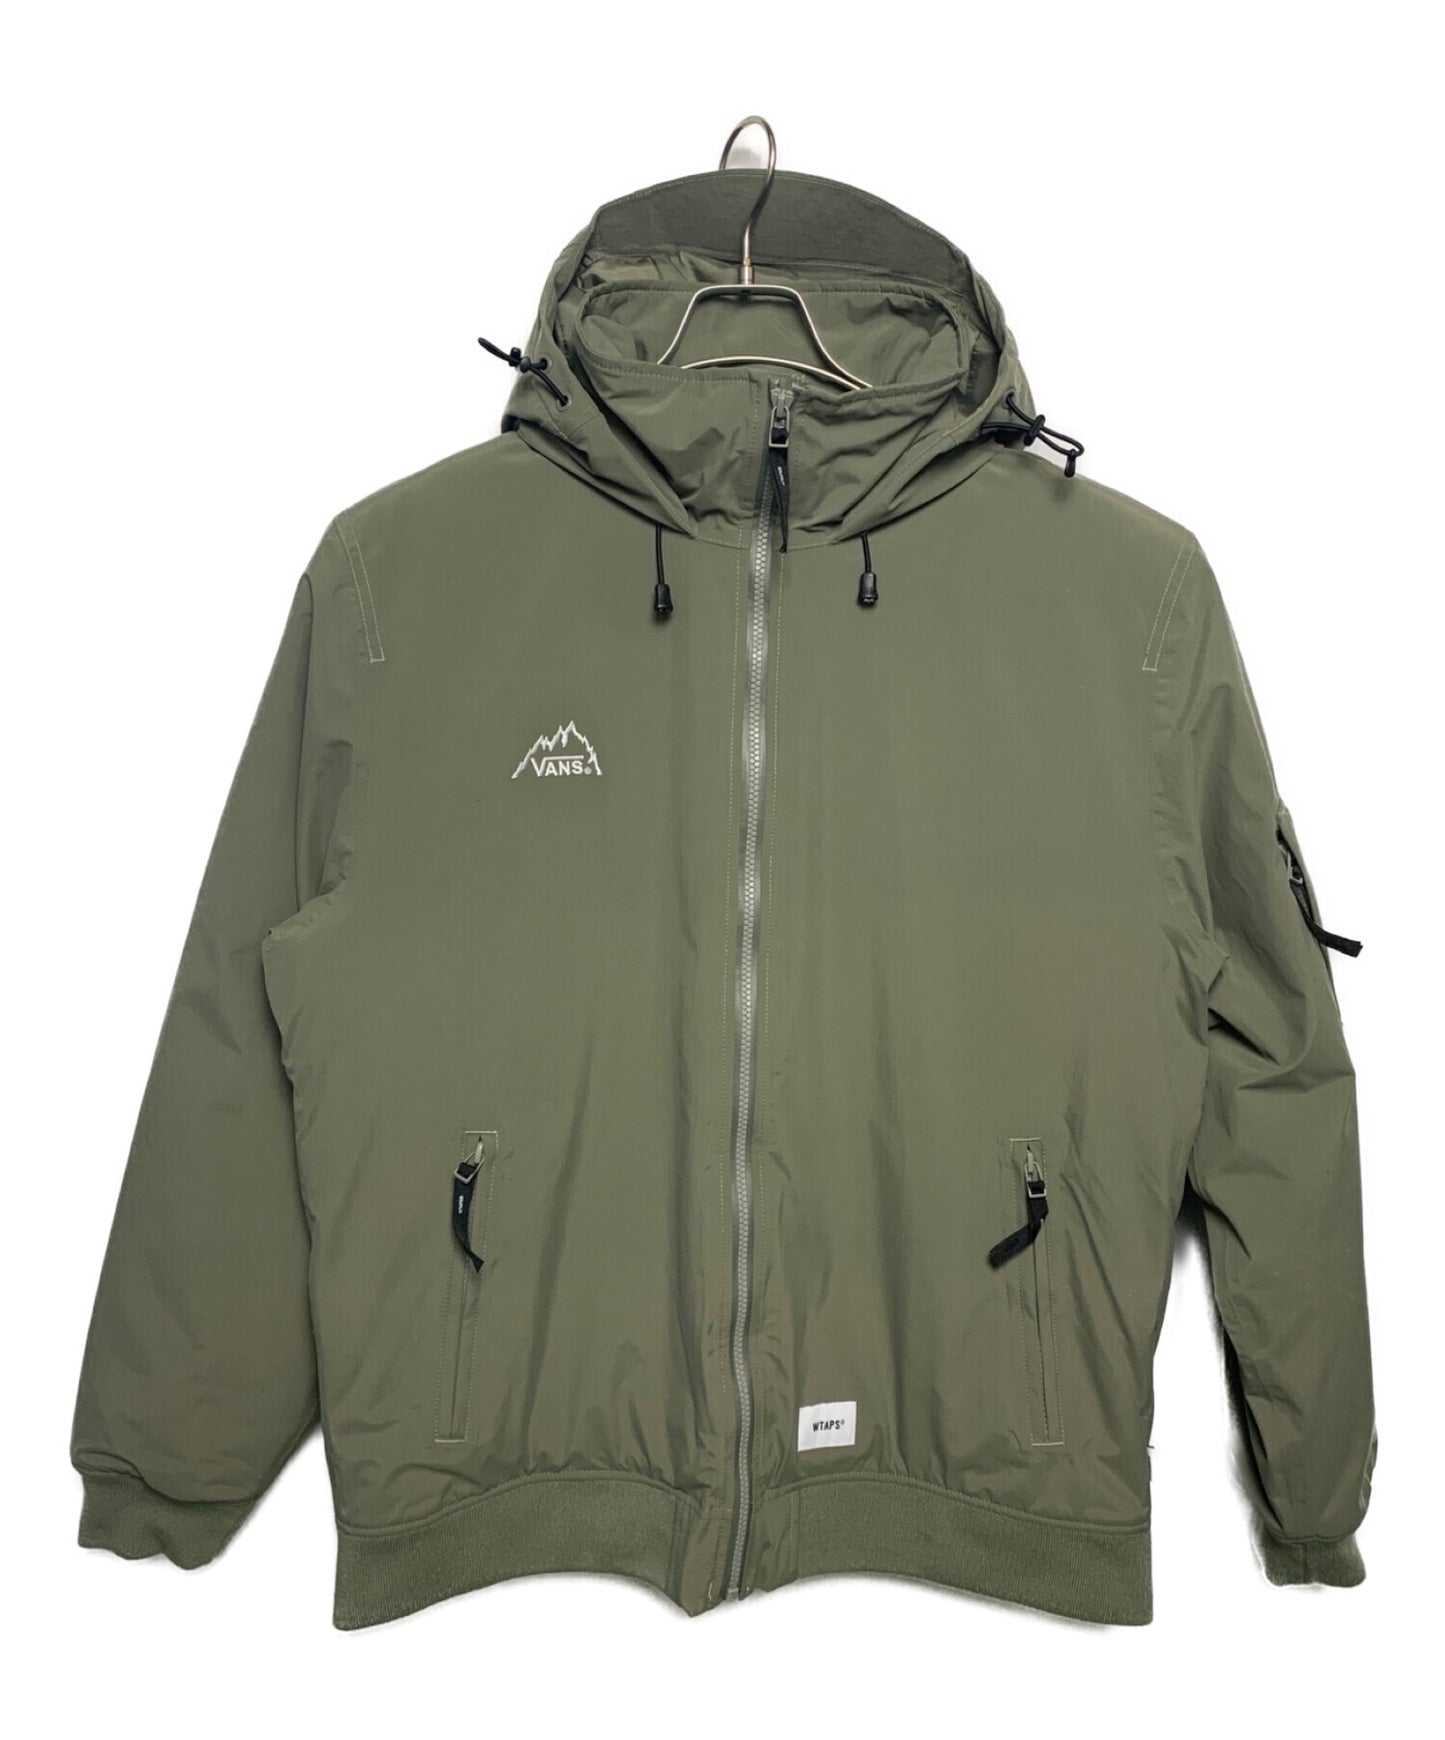 [Pre-owned] WTAPS MTE Jacket VN0A7SPPYLS